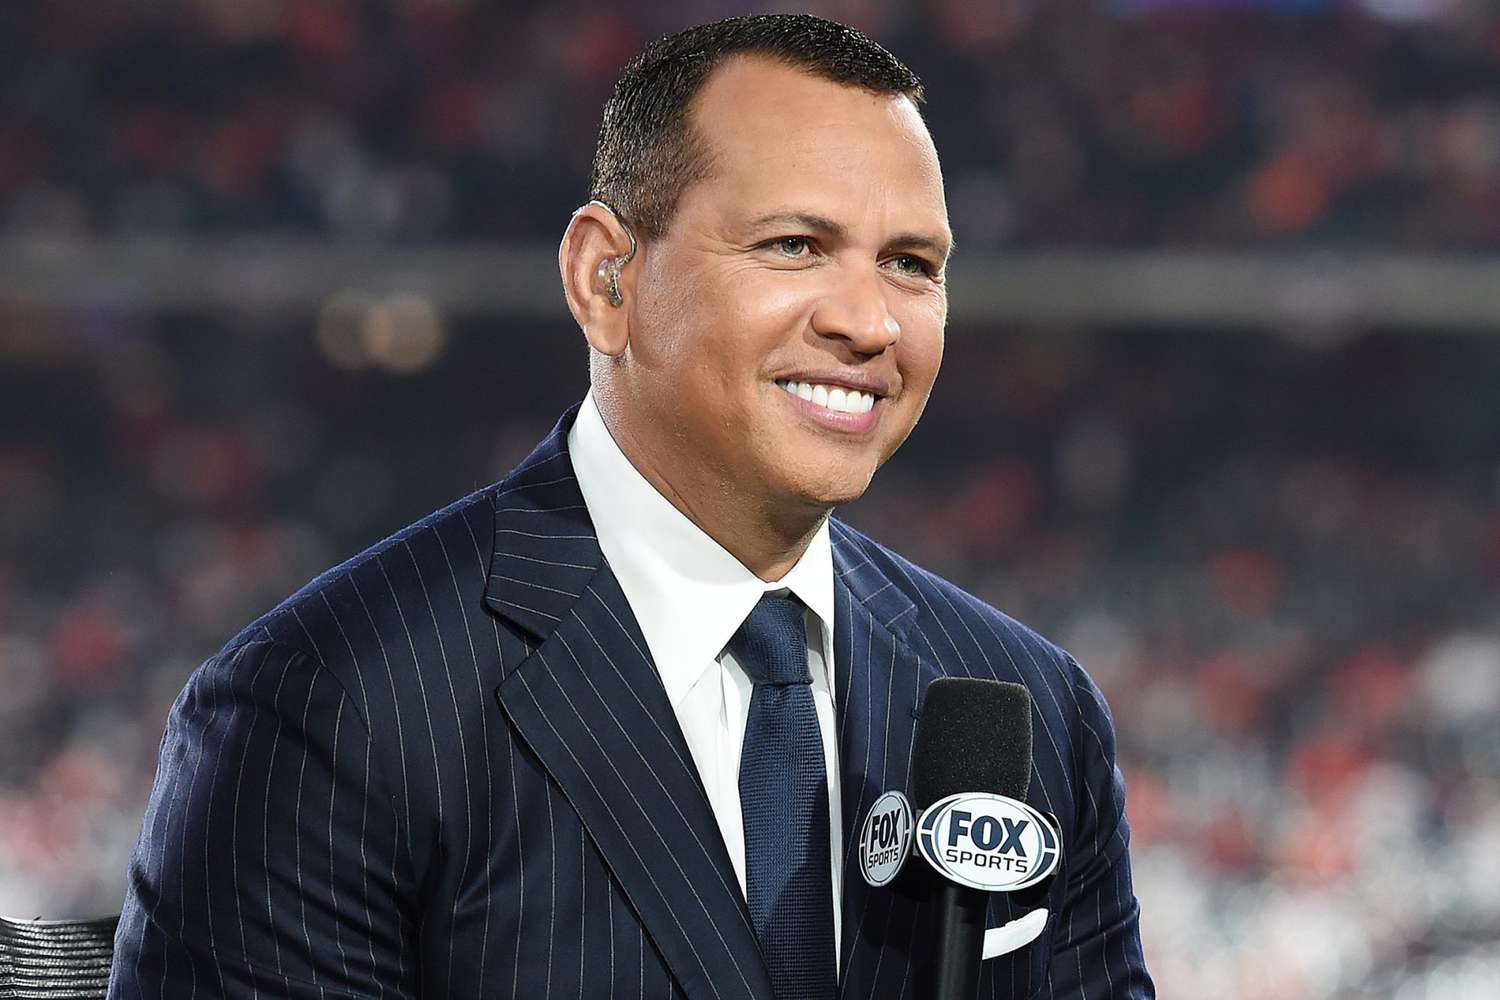 Alex Rodriguez wearing a blue stripes suit while holding a mic